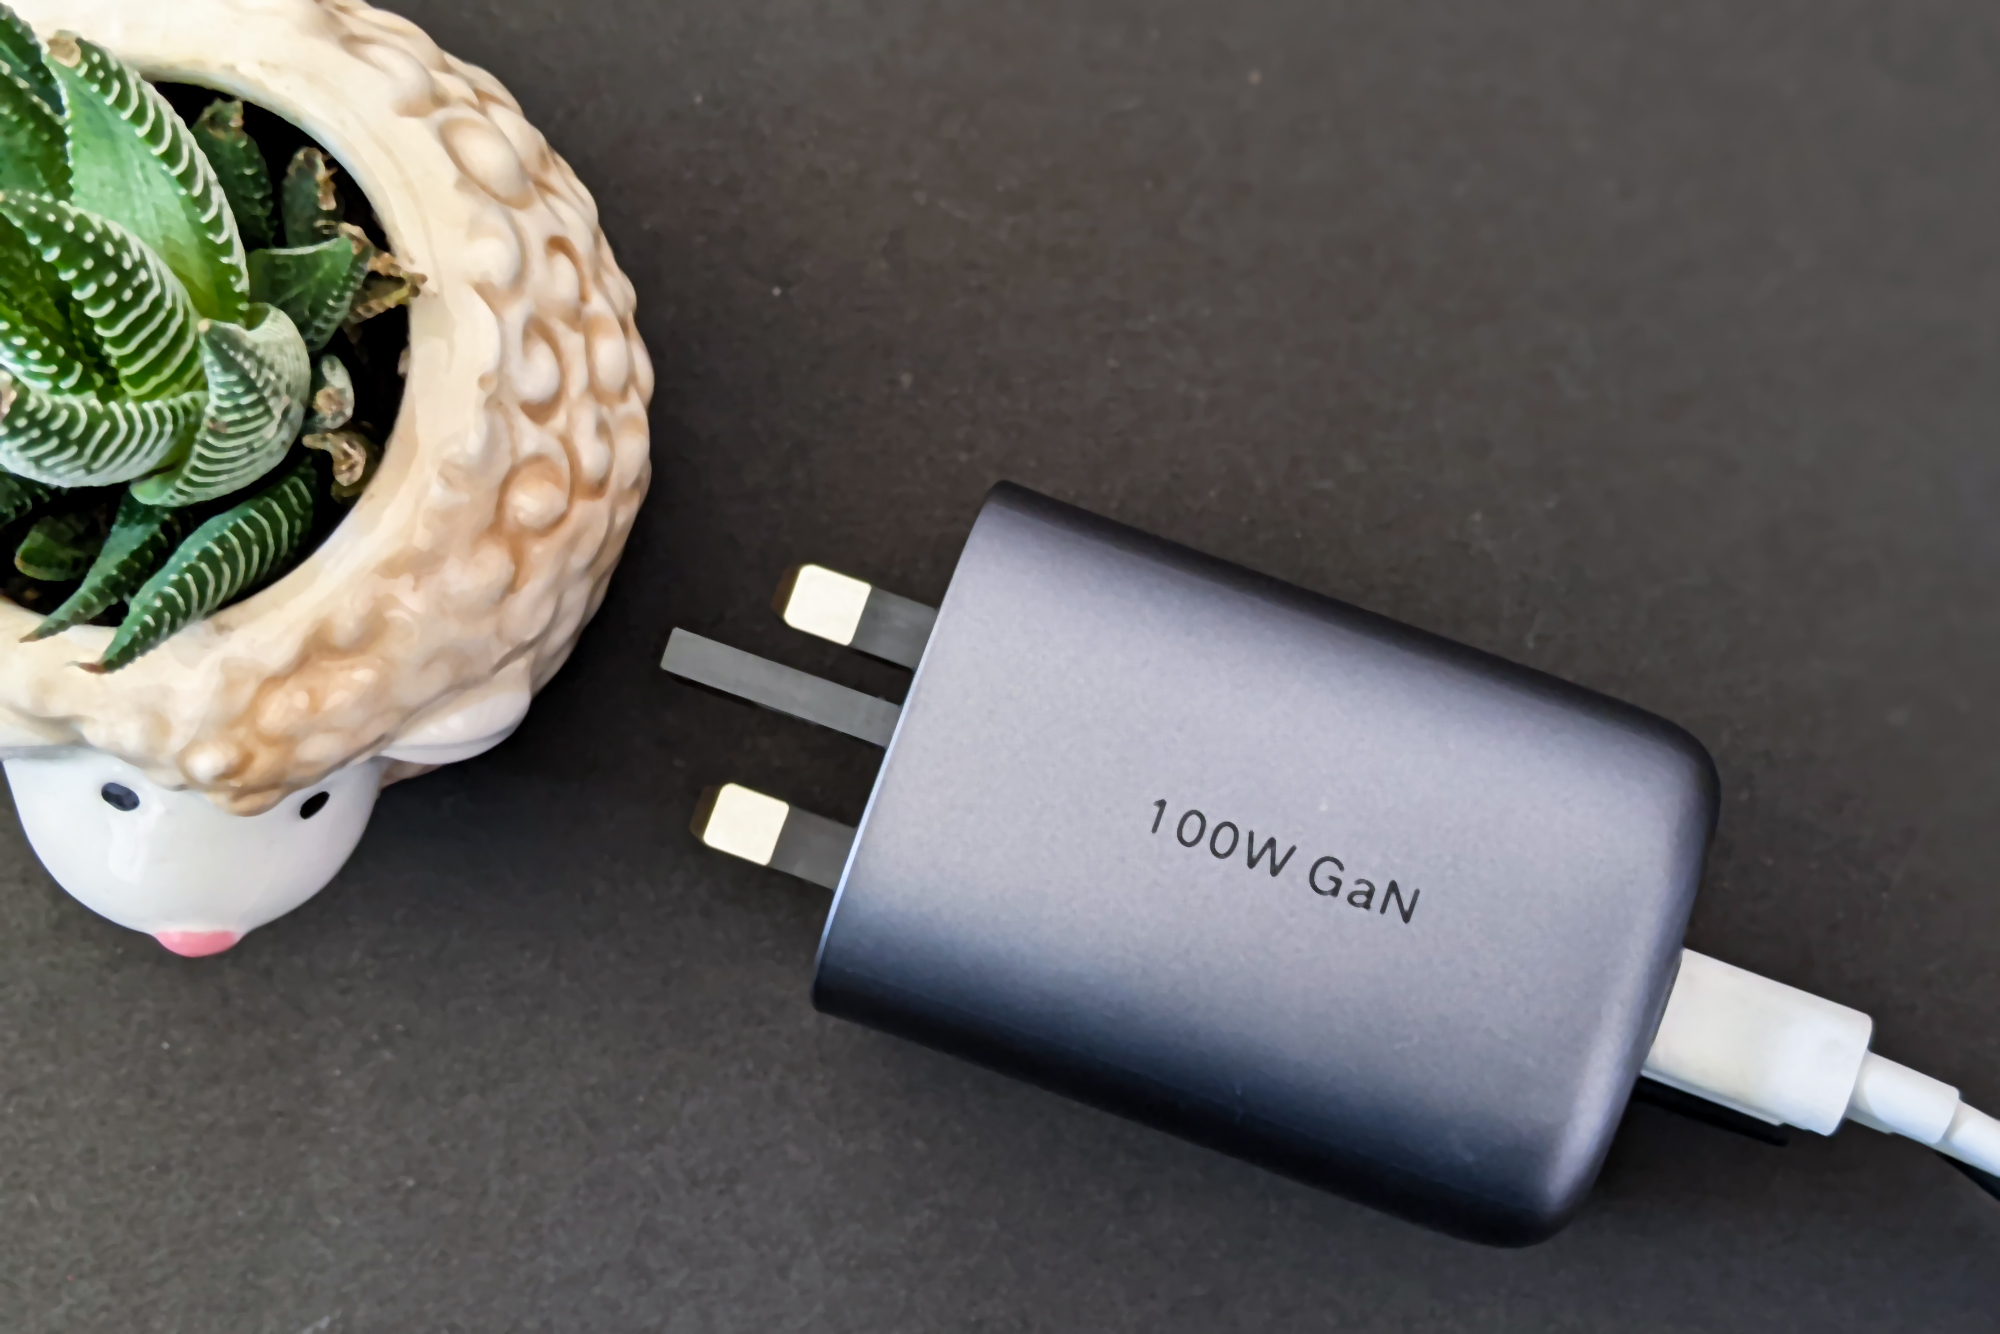 UGREEN 65W GaN Charger Review